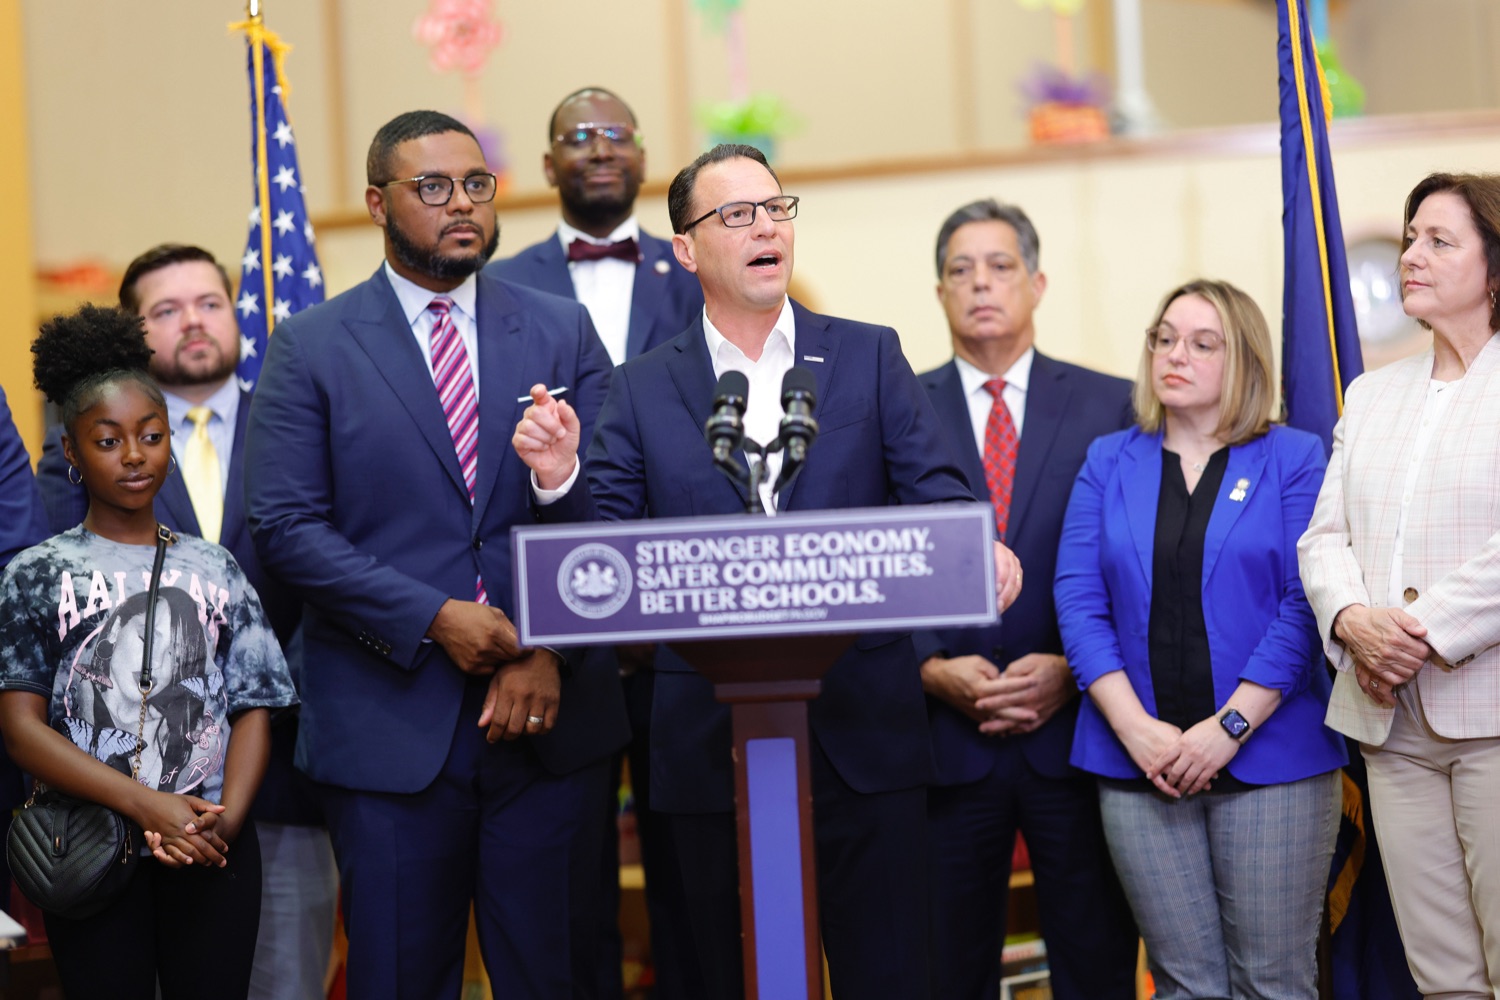 Governor Shapiro Signs Ceremonial Budget Bill Creating Universal Free Breakfast, Making Historic Investments in Public Education During Visit to Allegheny County Elementary School on August 8, 2023.<br><a href="https://filesource.amperwave.net/commonwealthofpa/photo/23563_Gov_Education_DZ_005.JPEG" target="_blank">⇣ Download Photo</a>